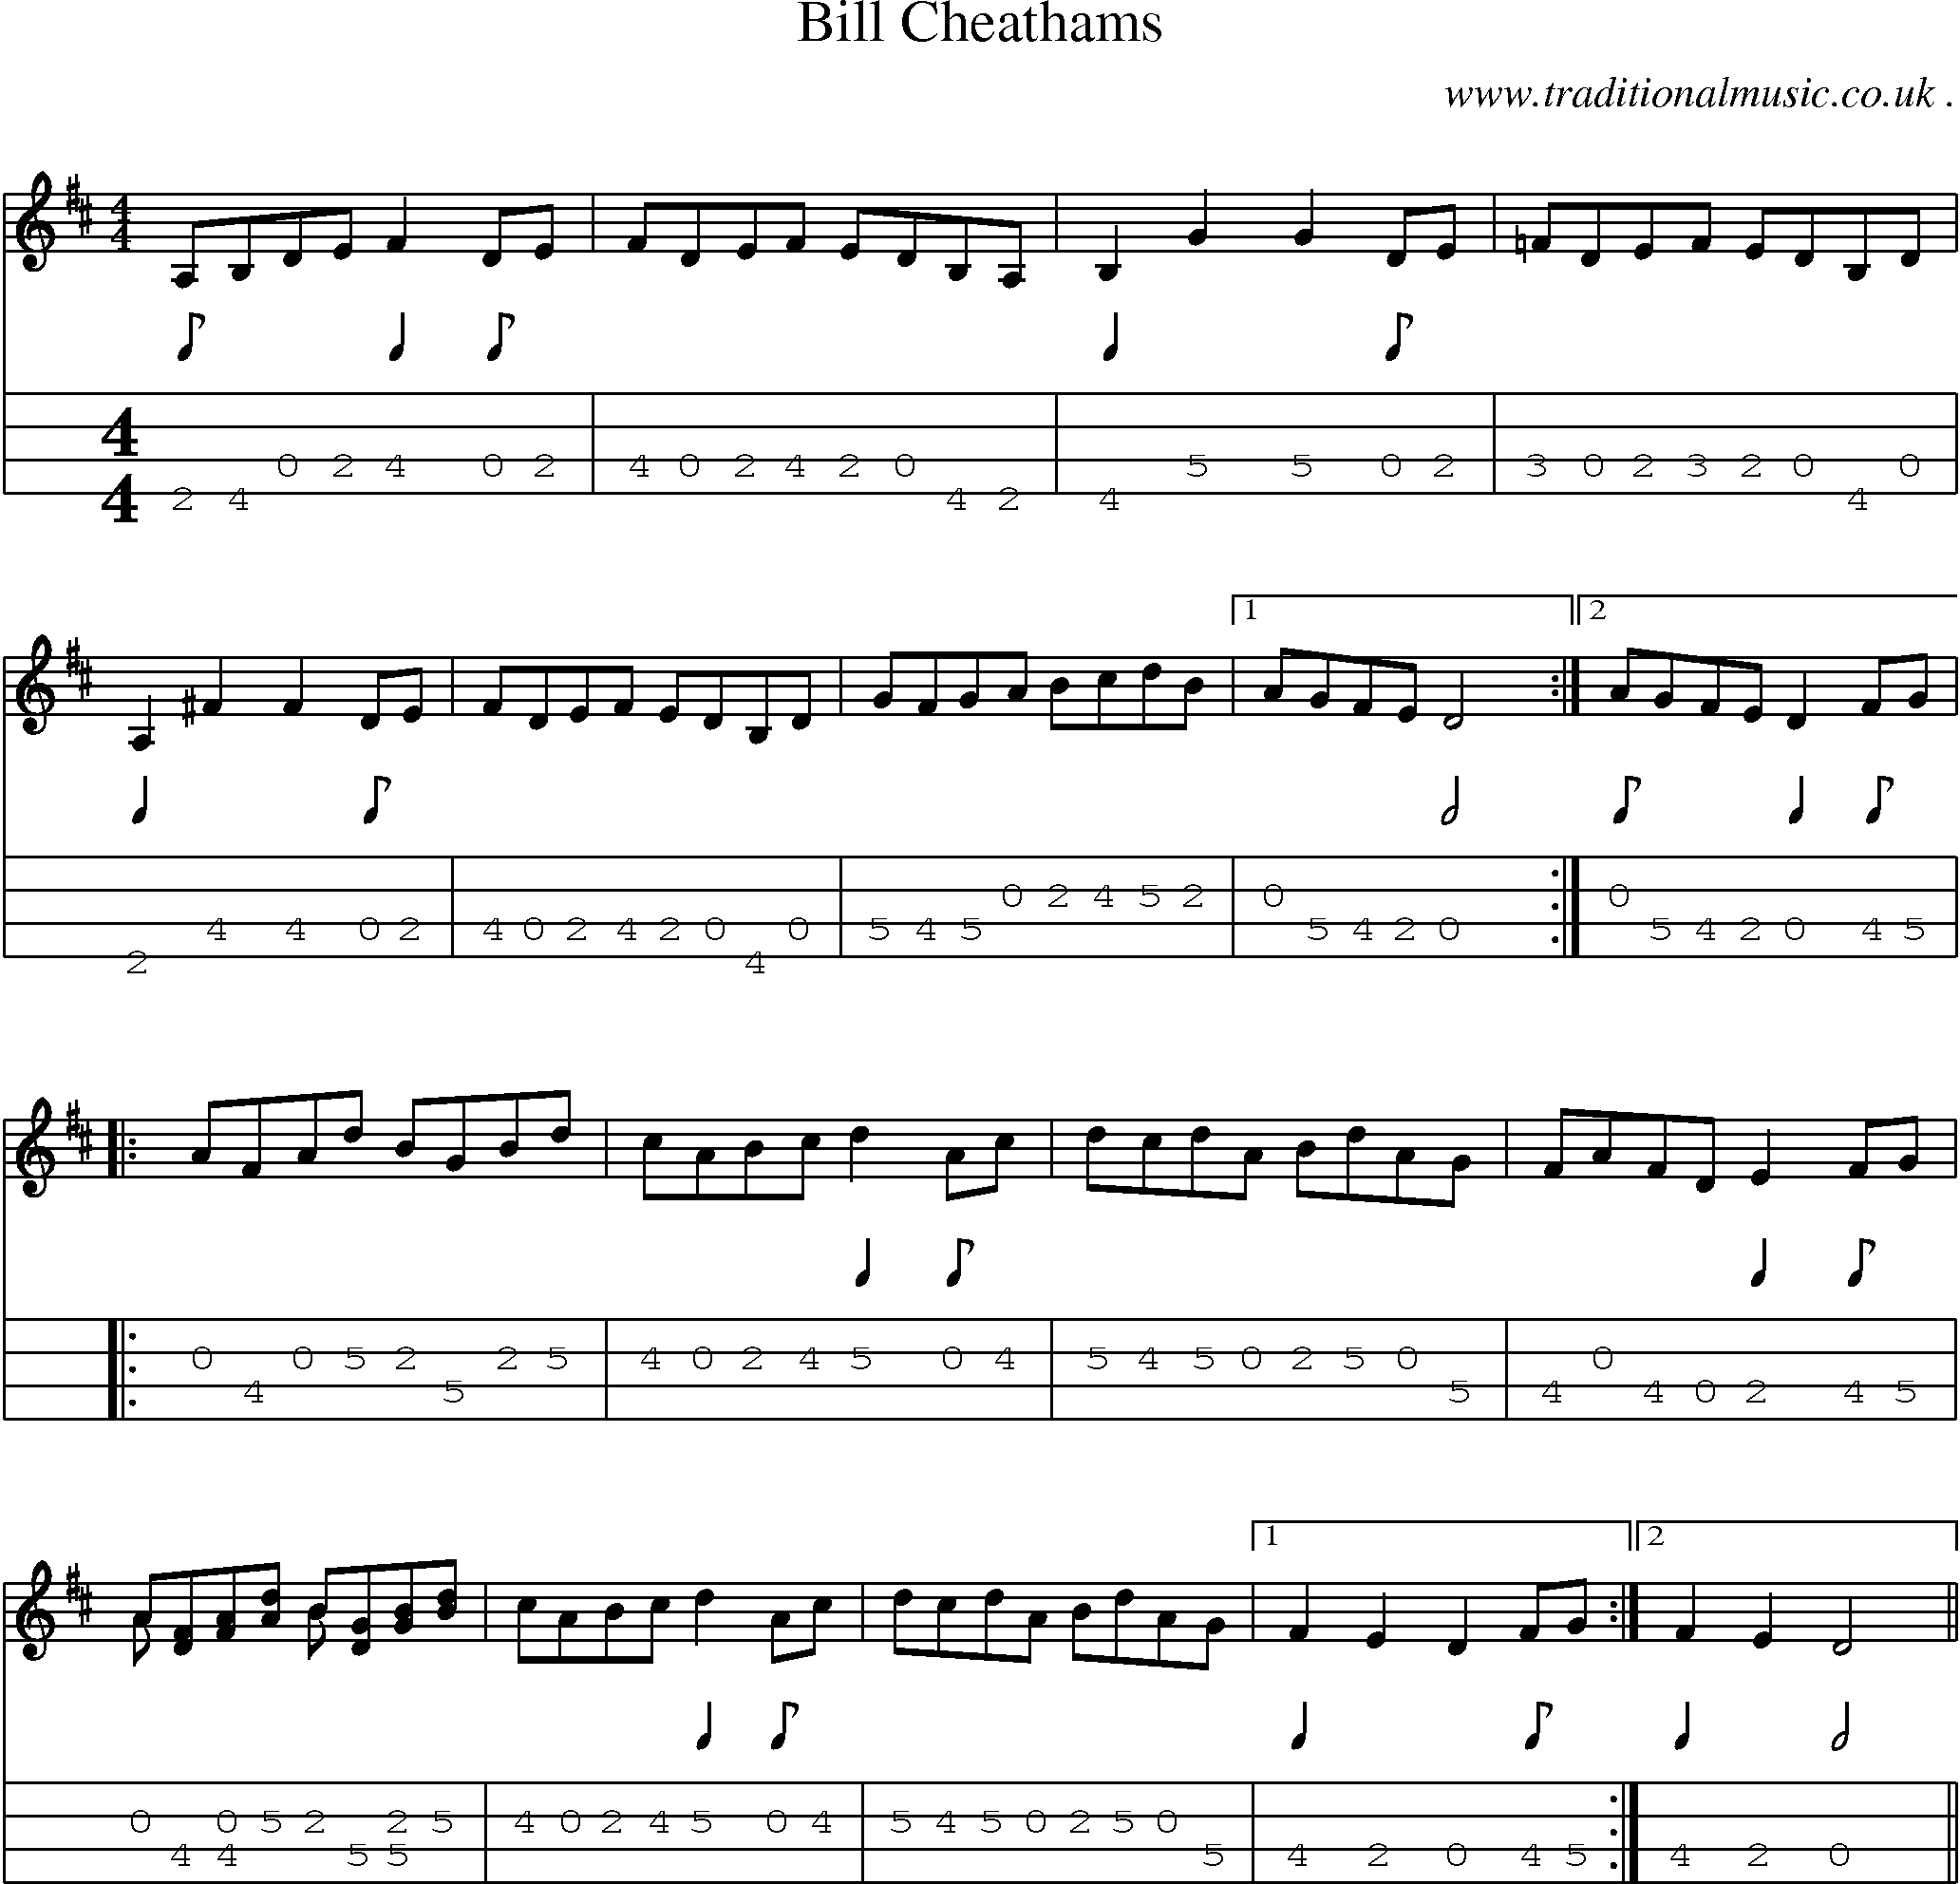 Music Score and Guitar Tabs for Bill Cheathams